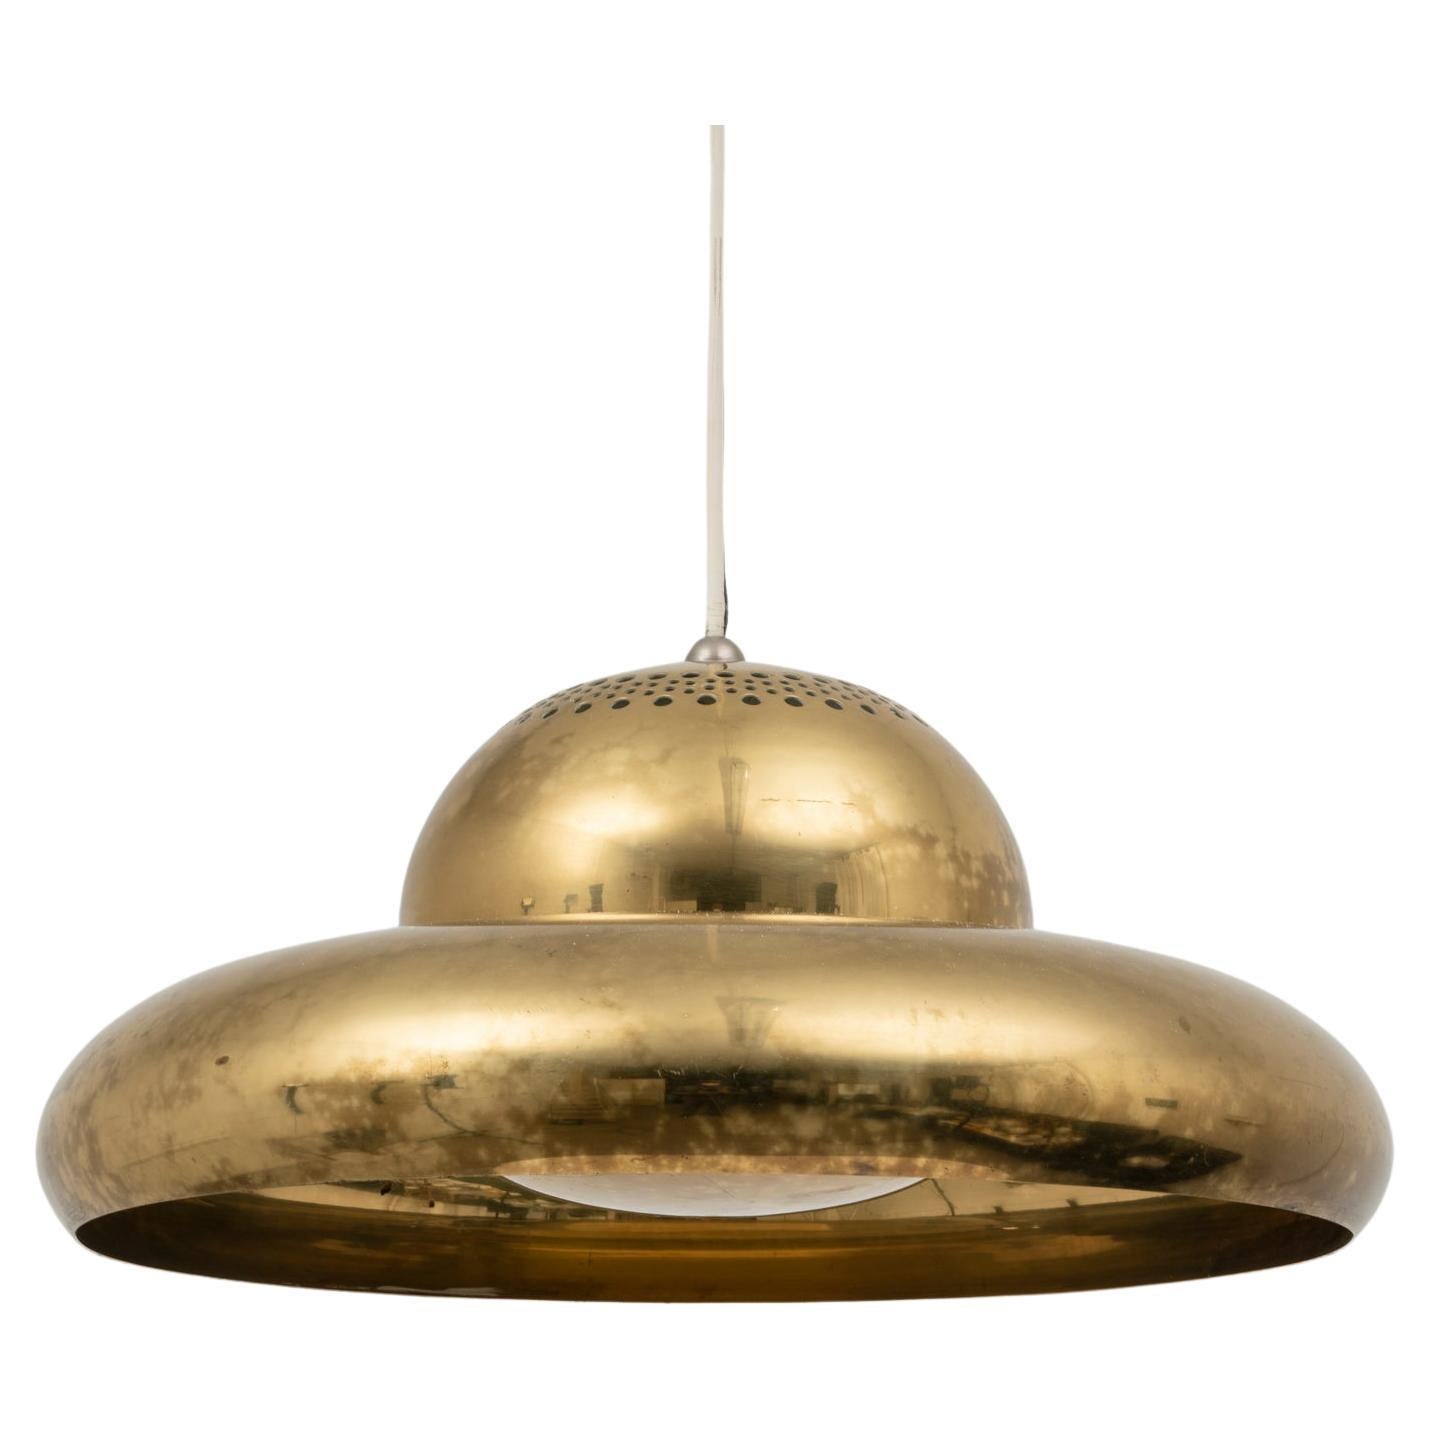 "Fior di Loto" Brass Pendant Lamp by Afra & Tobia Scarpa for Flos 1962